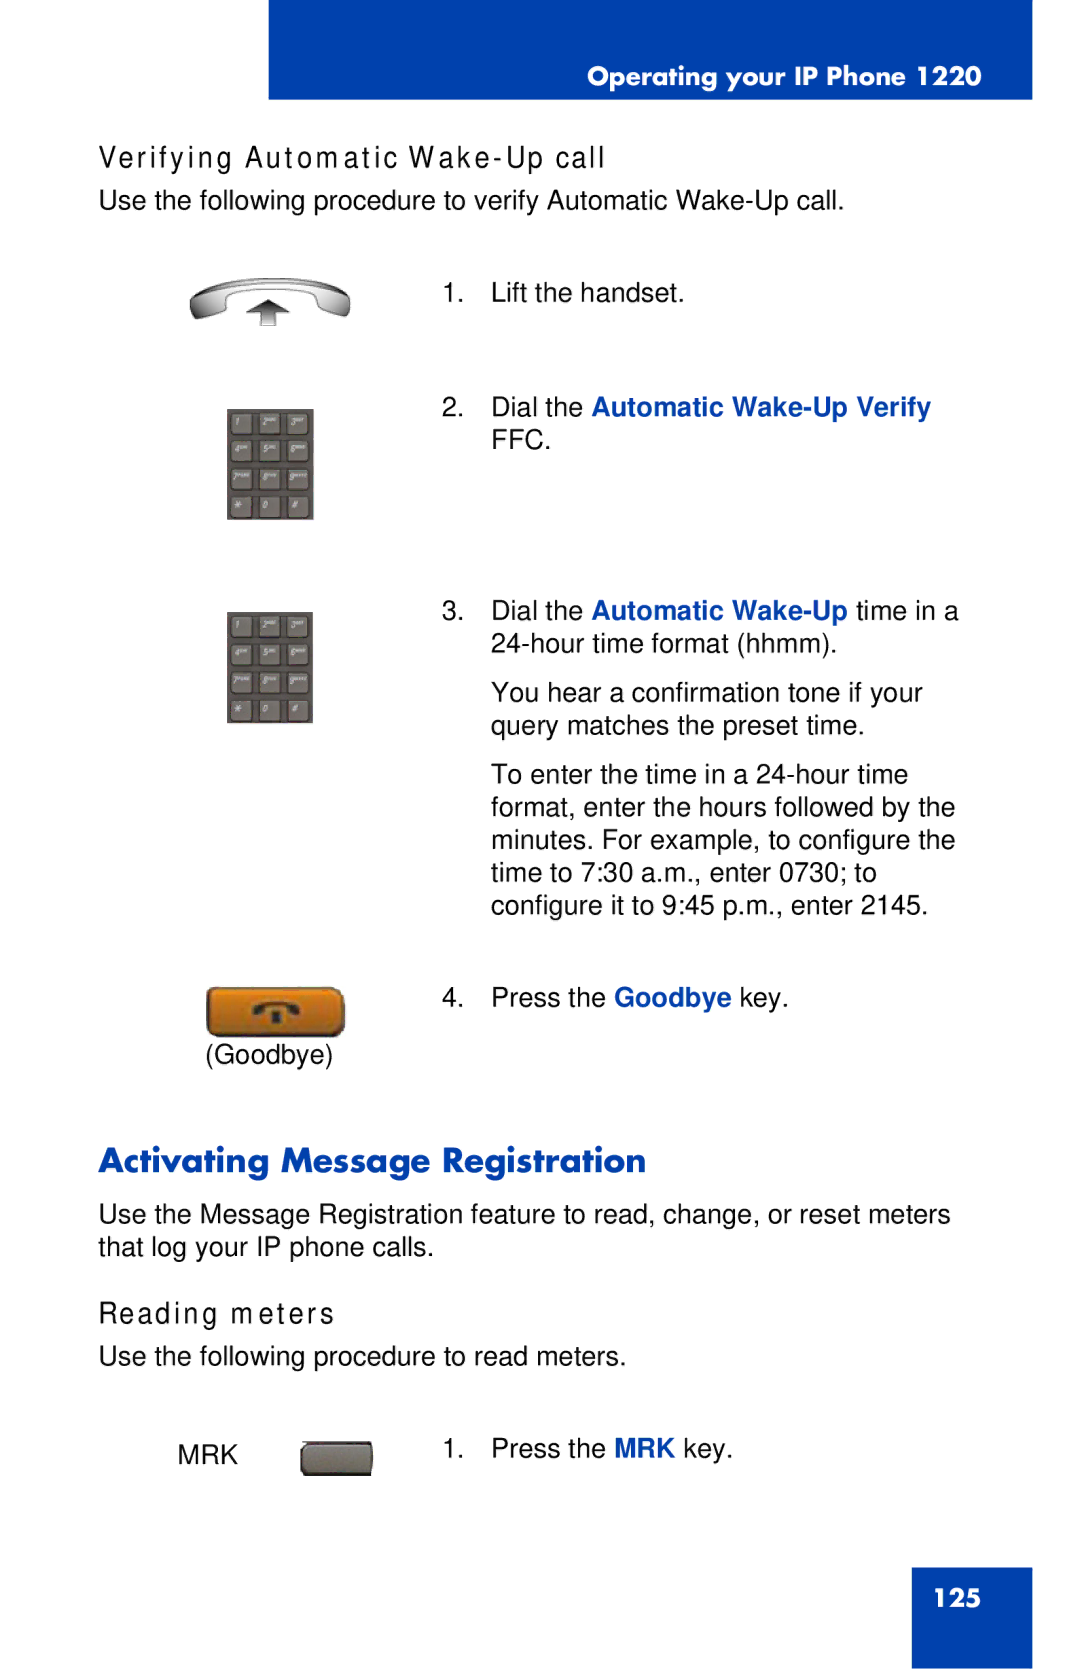 Nortel Networks IP Phone 1220 manual Activating Message Registration, Verifying Automatic Wake-Up call, Reading meters 